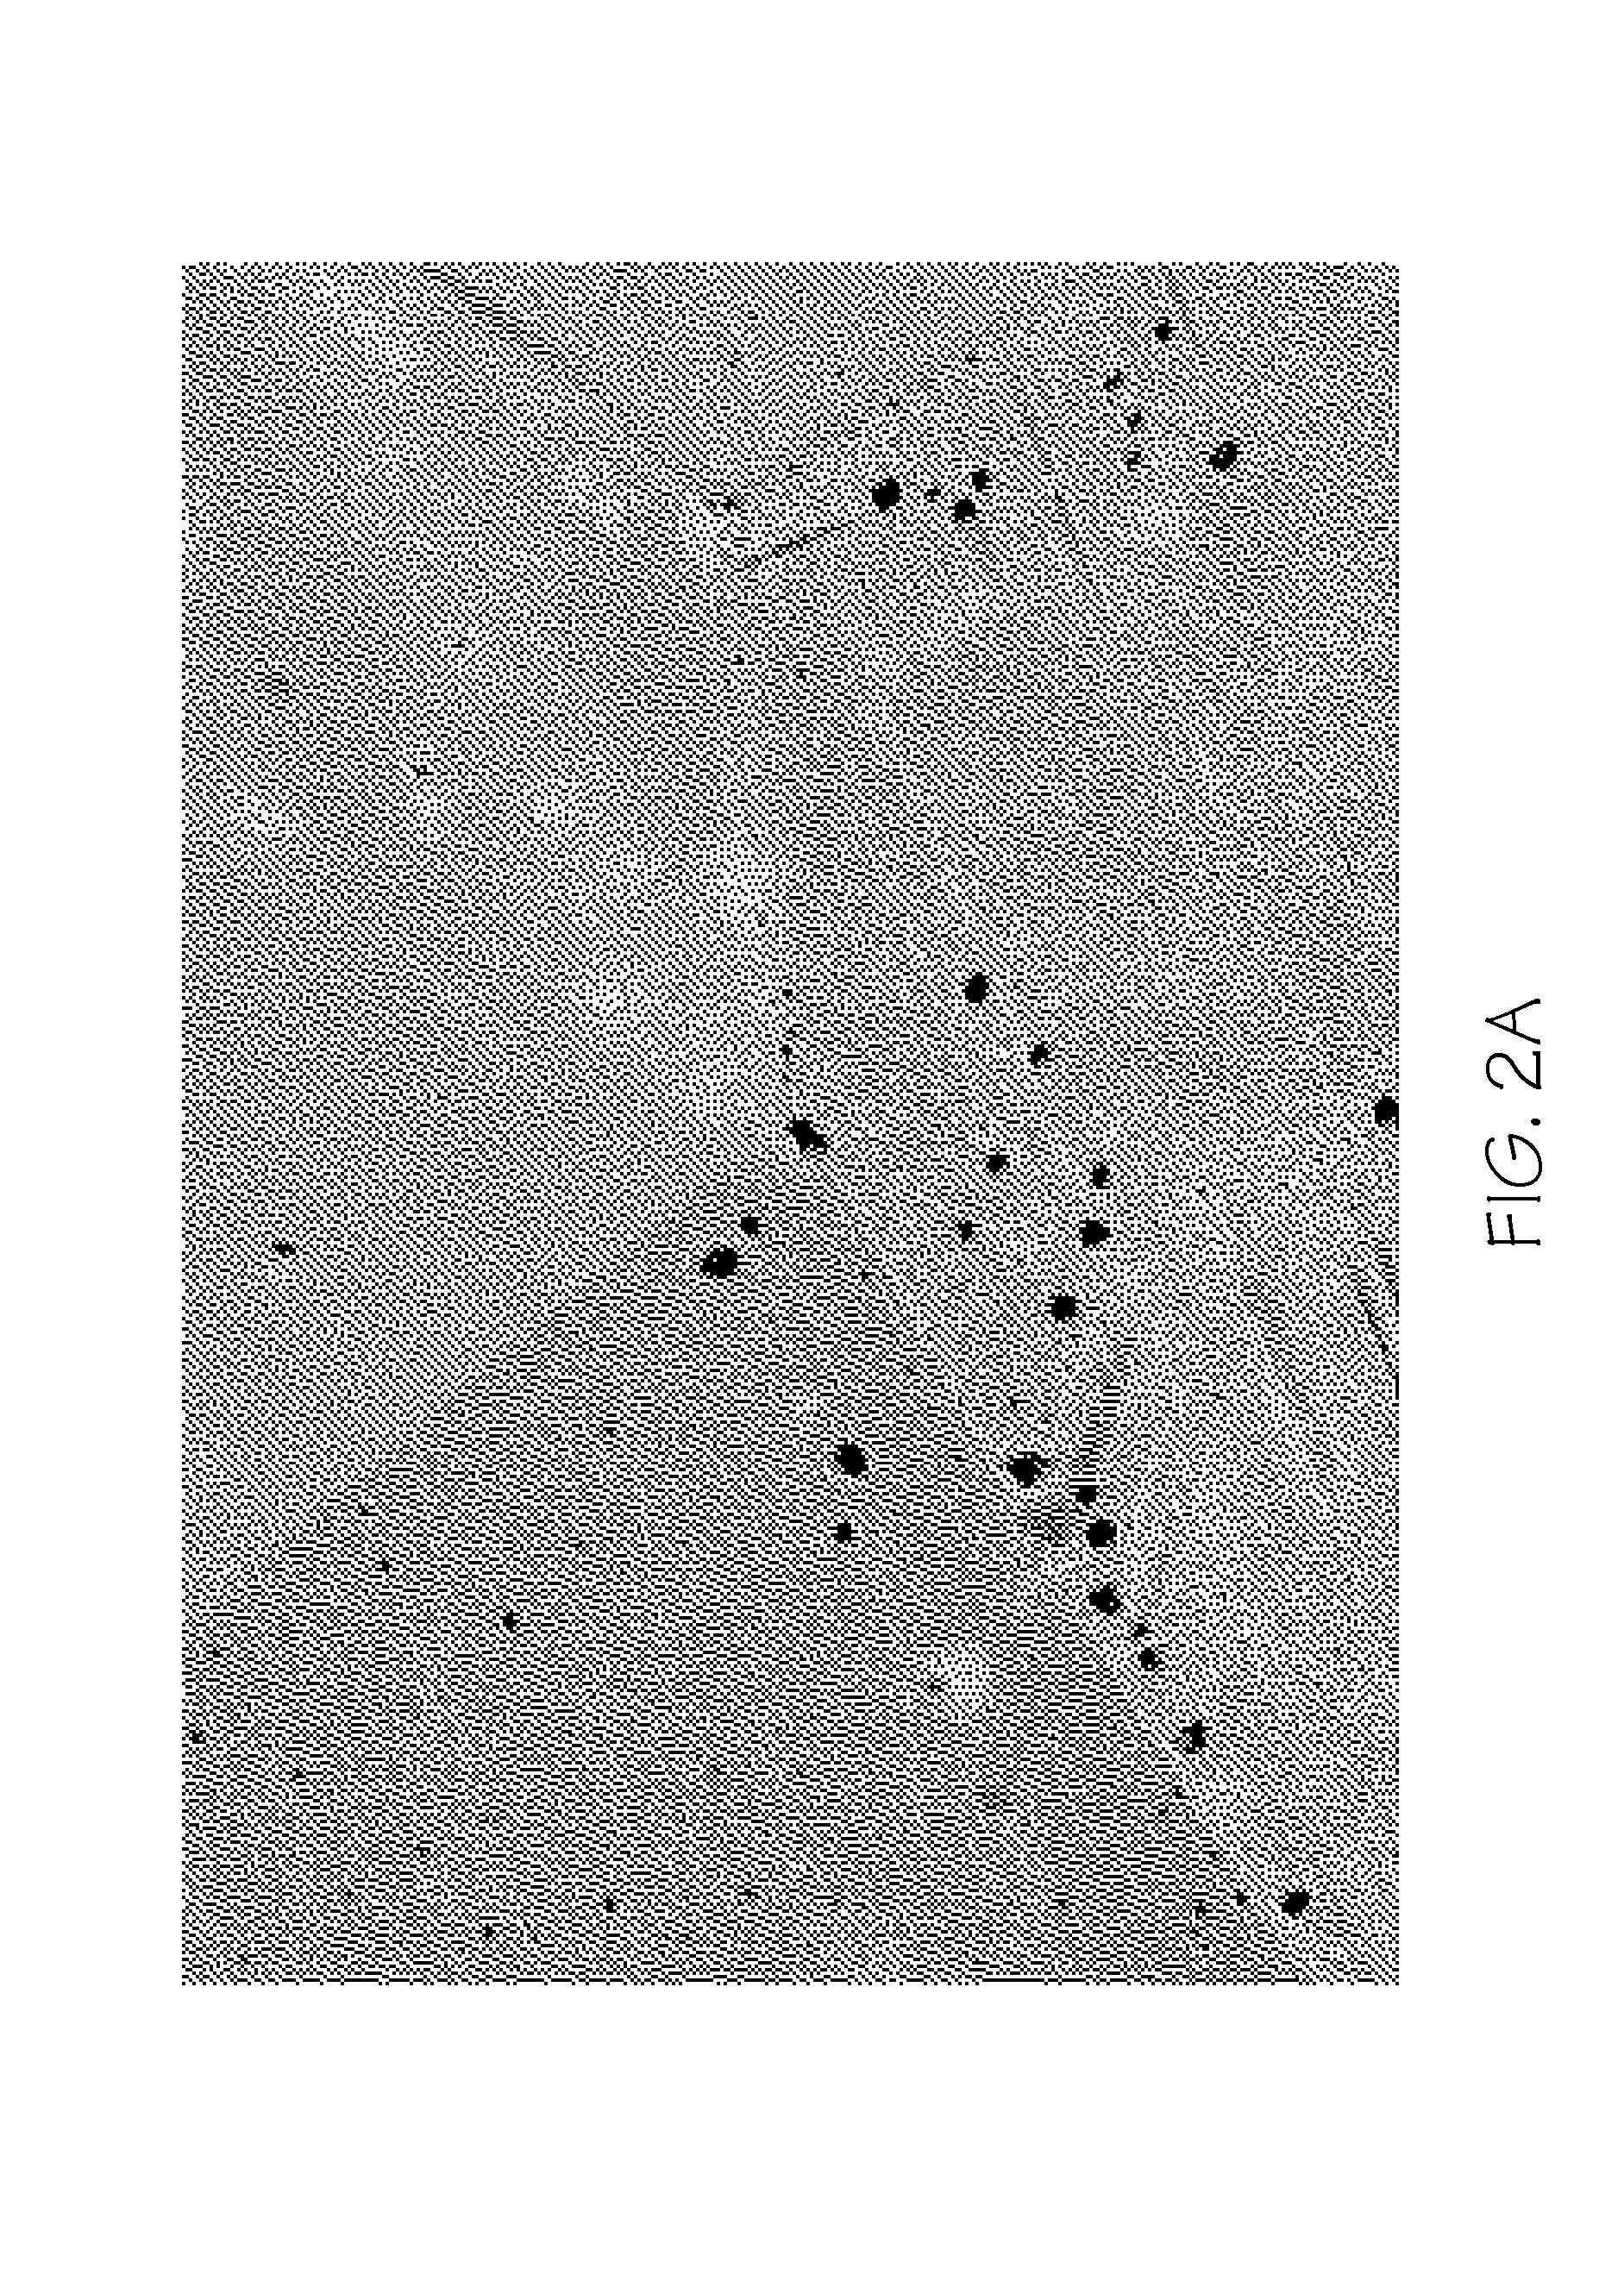 Method of depositing durable thin gold coating on fuel cell bipolar plates